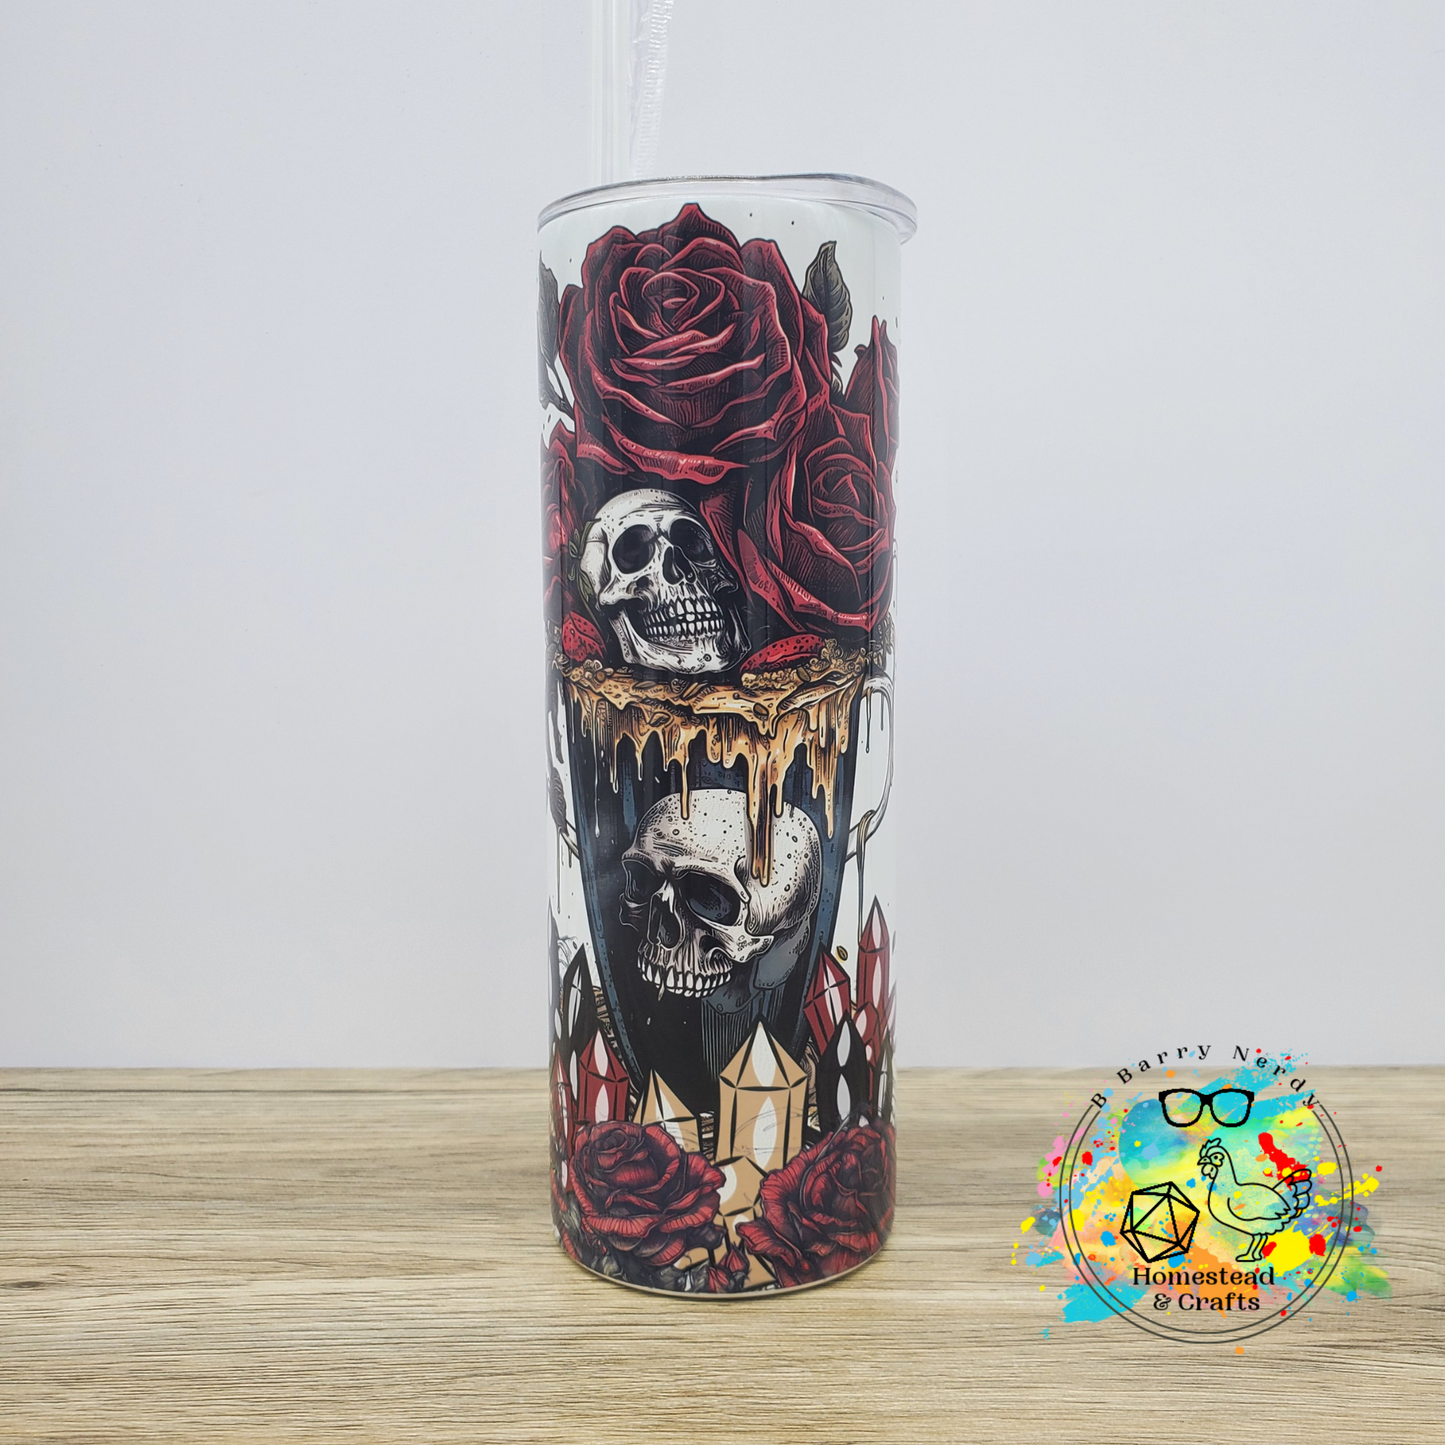 Coffee, Crystals and Covens, 20 oz Sublimated Steel Tumbler